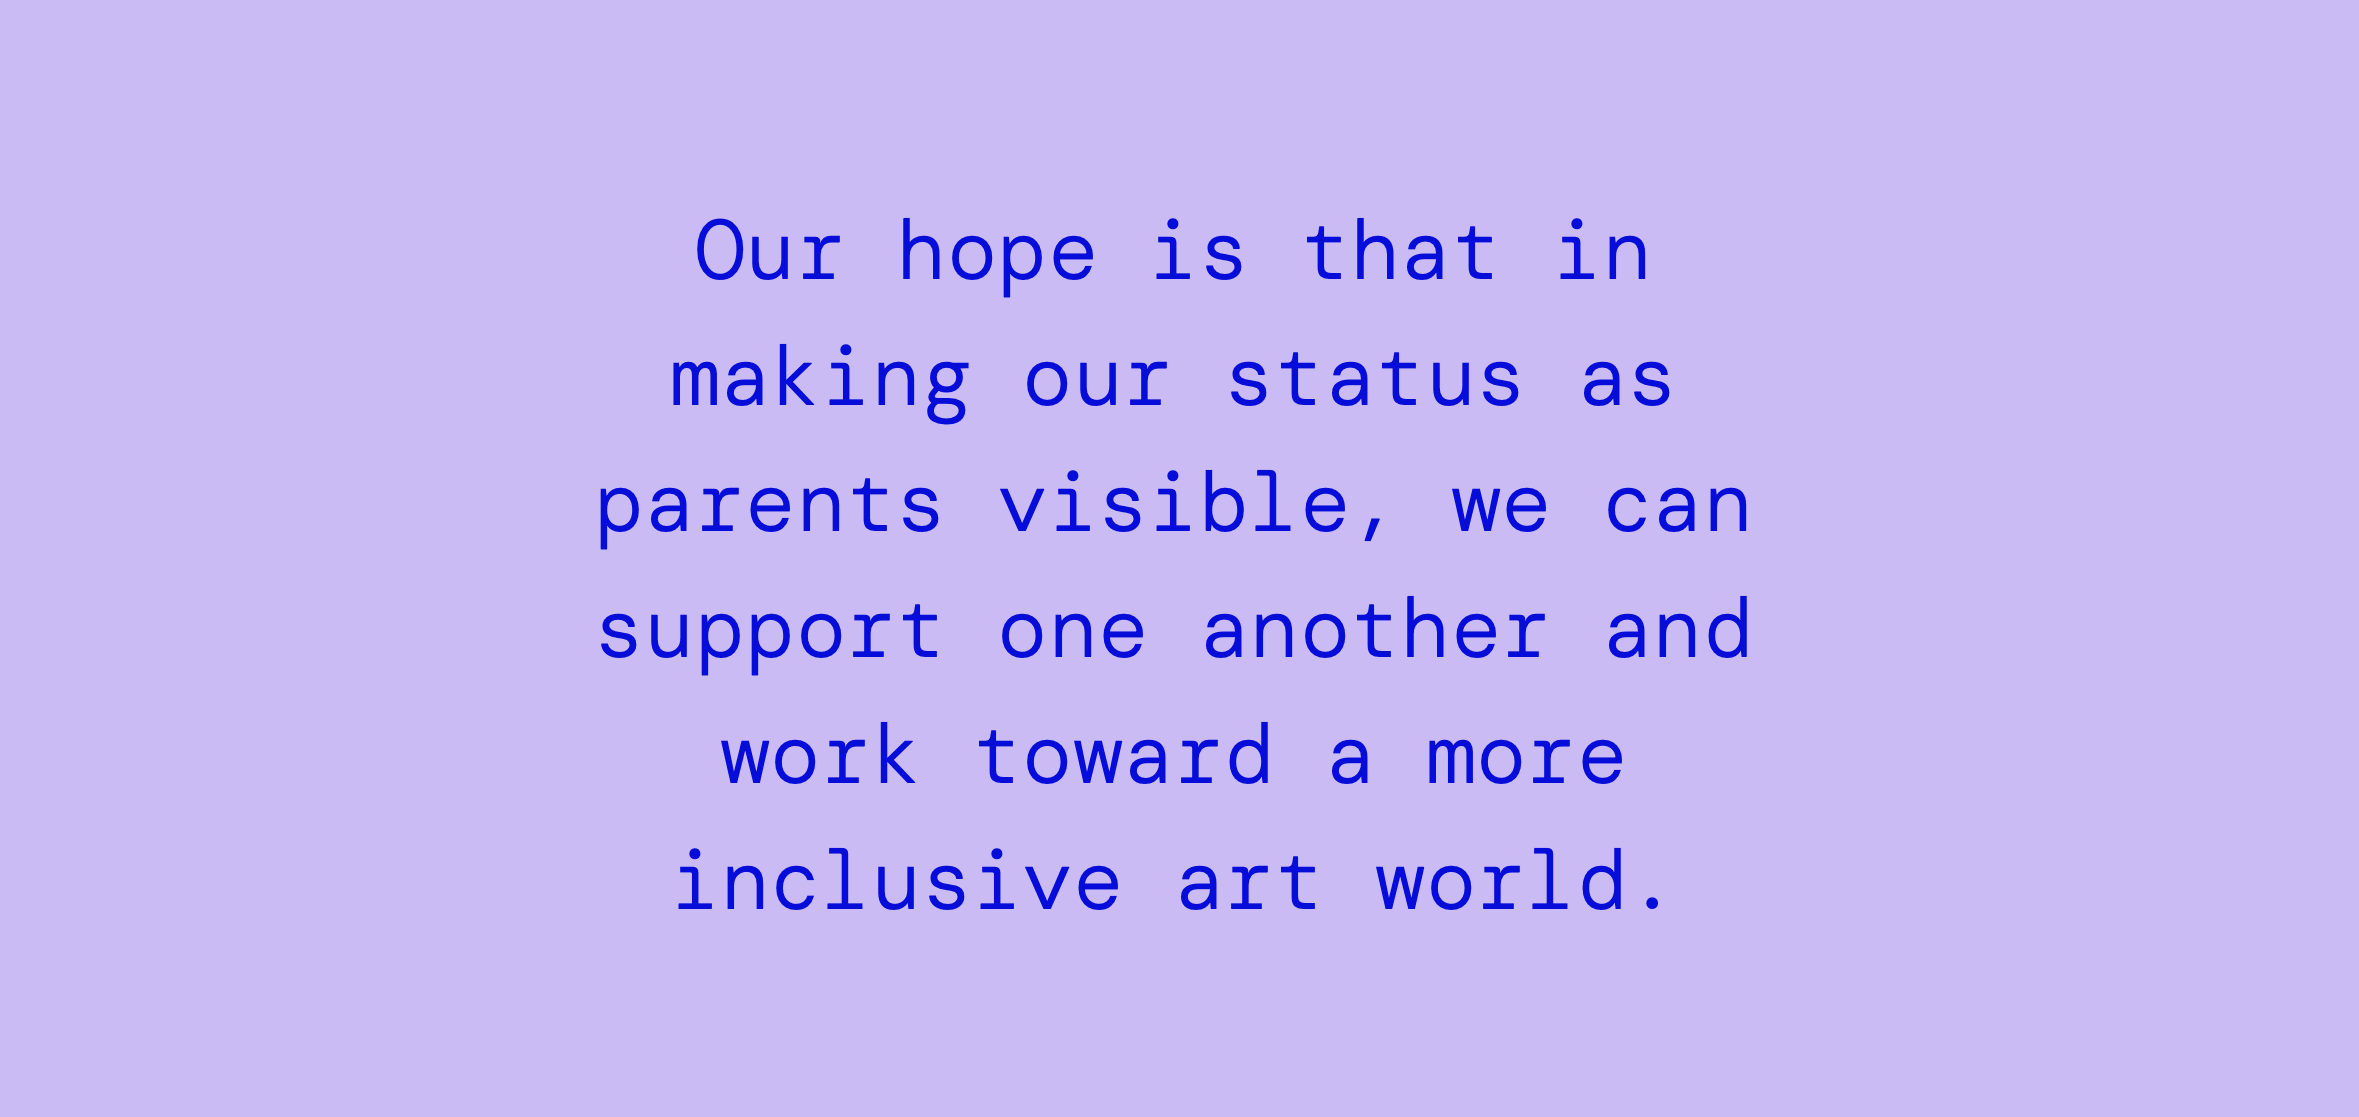 Better Together #6: The Art Working Parents Alliance